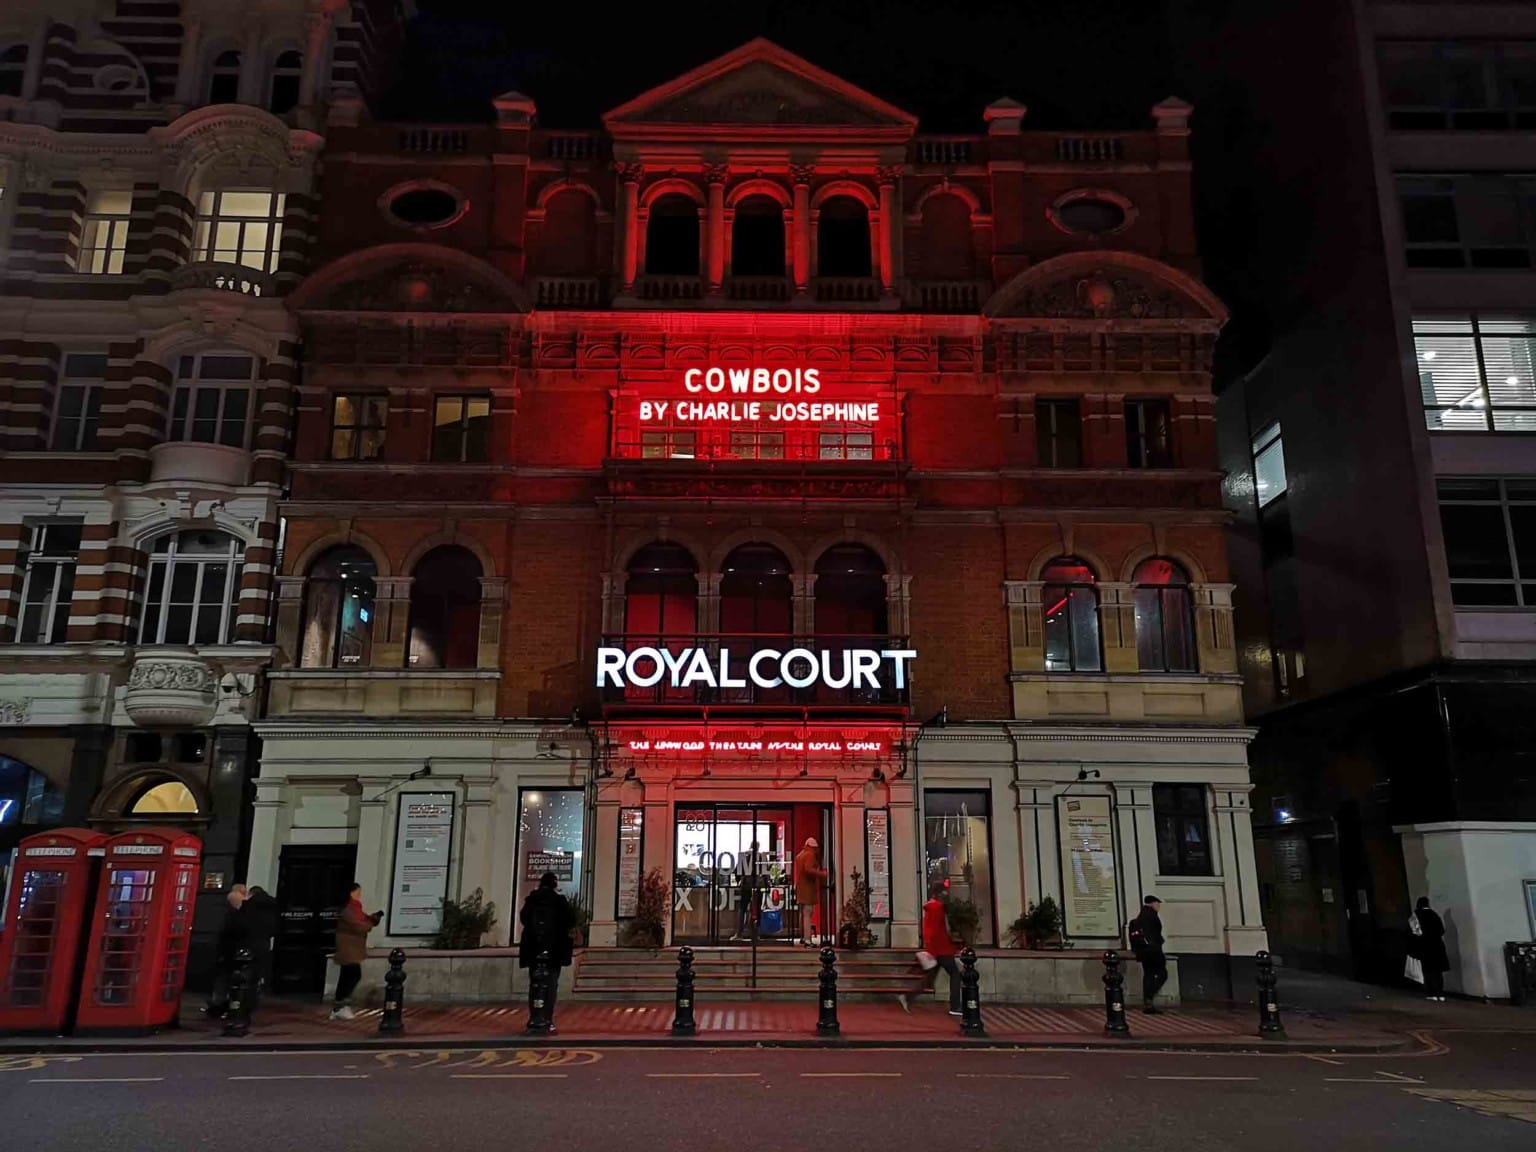 The Royal Court in Sloane Square